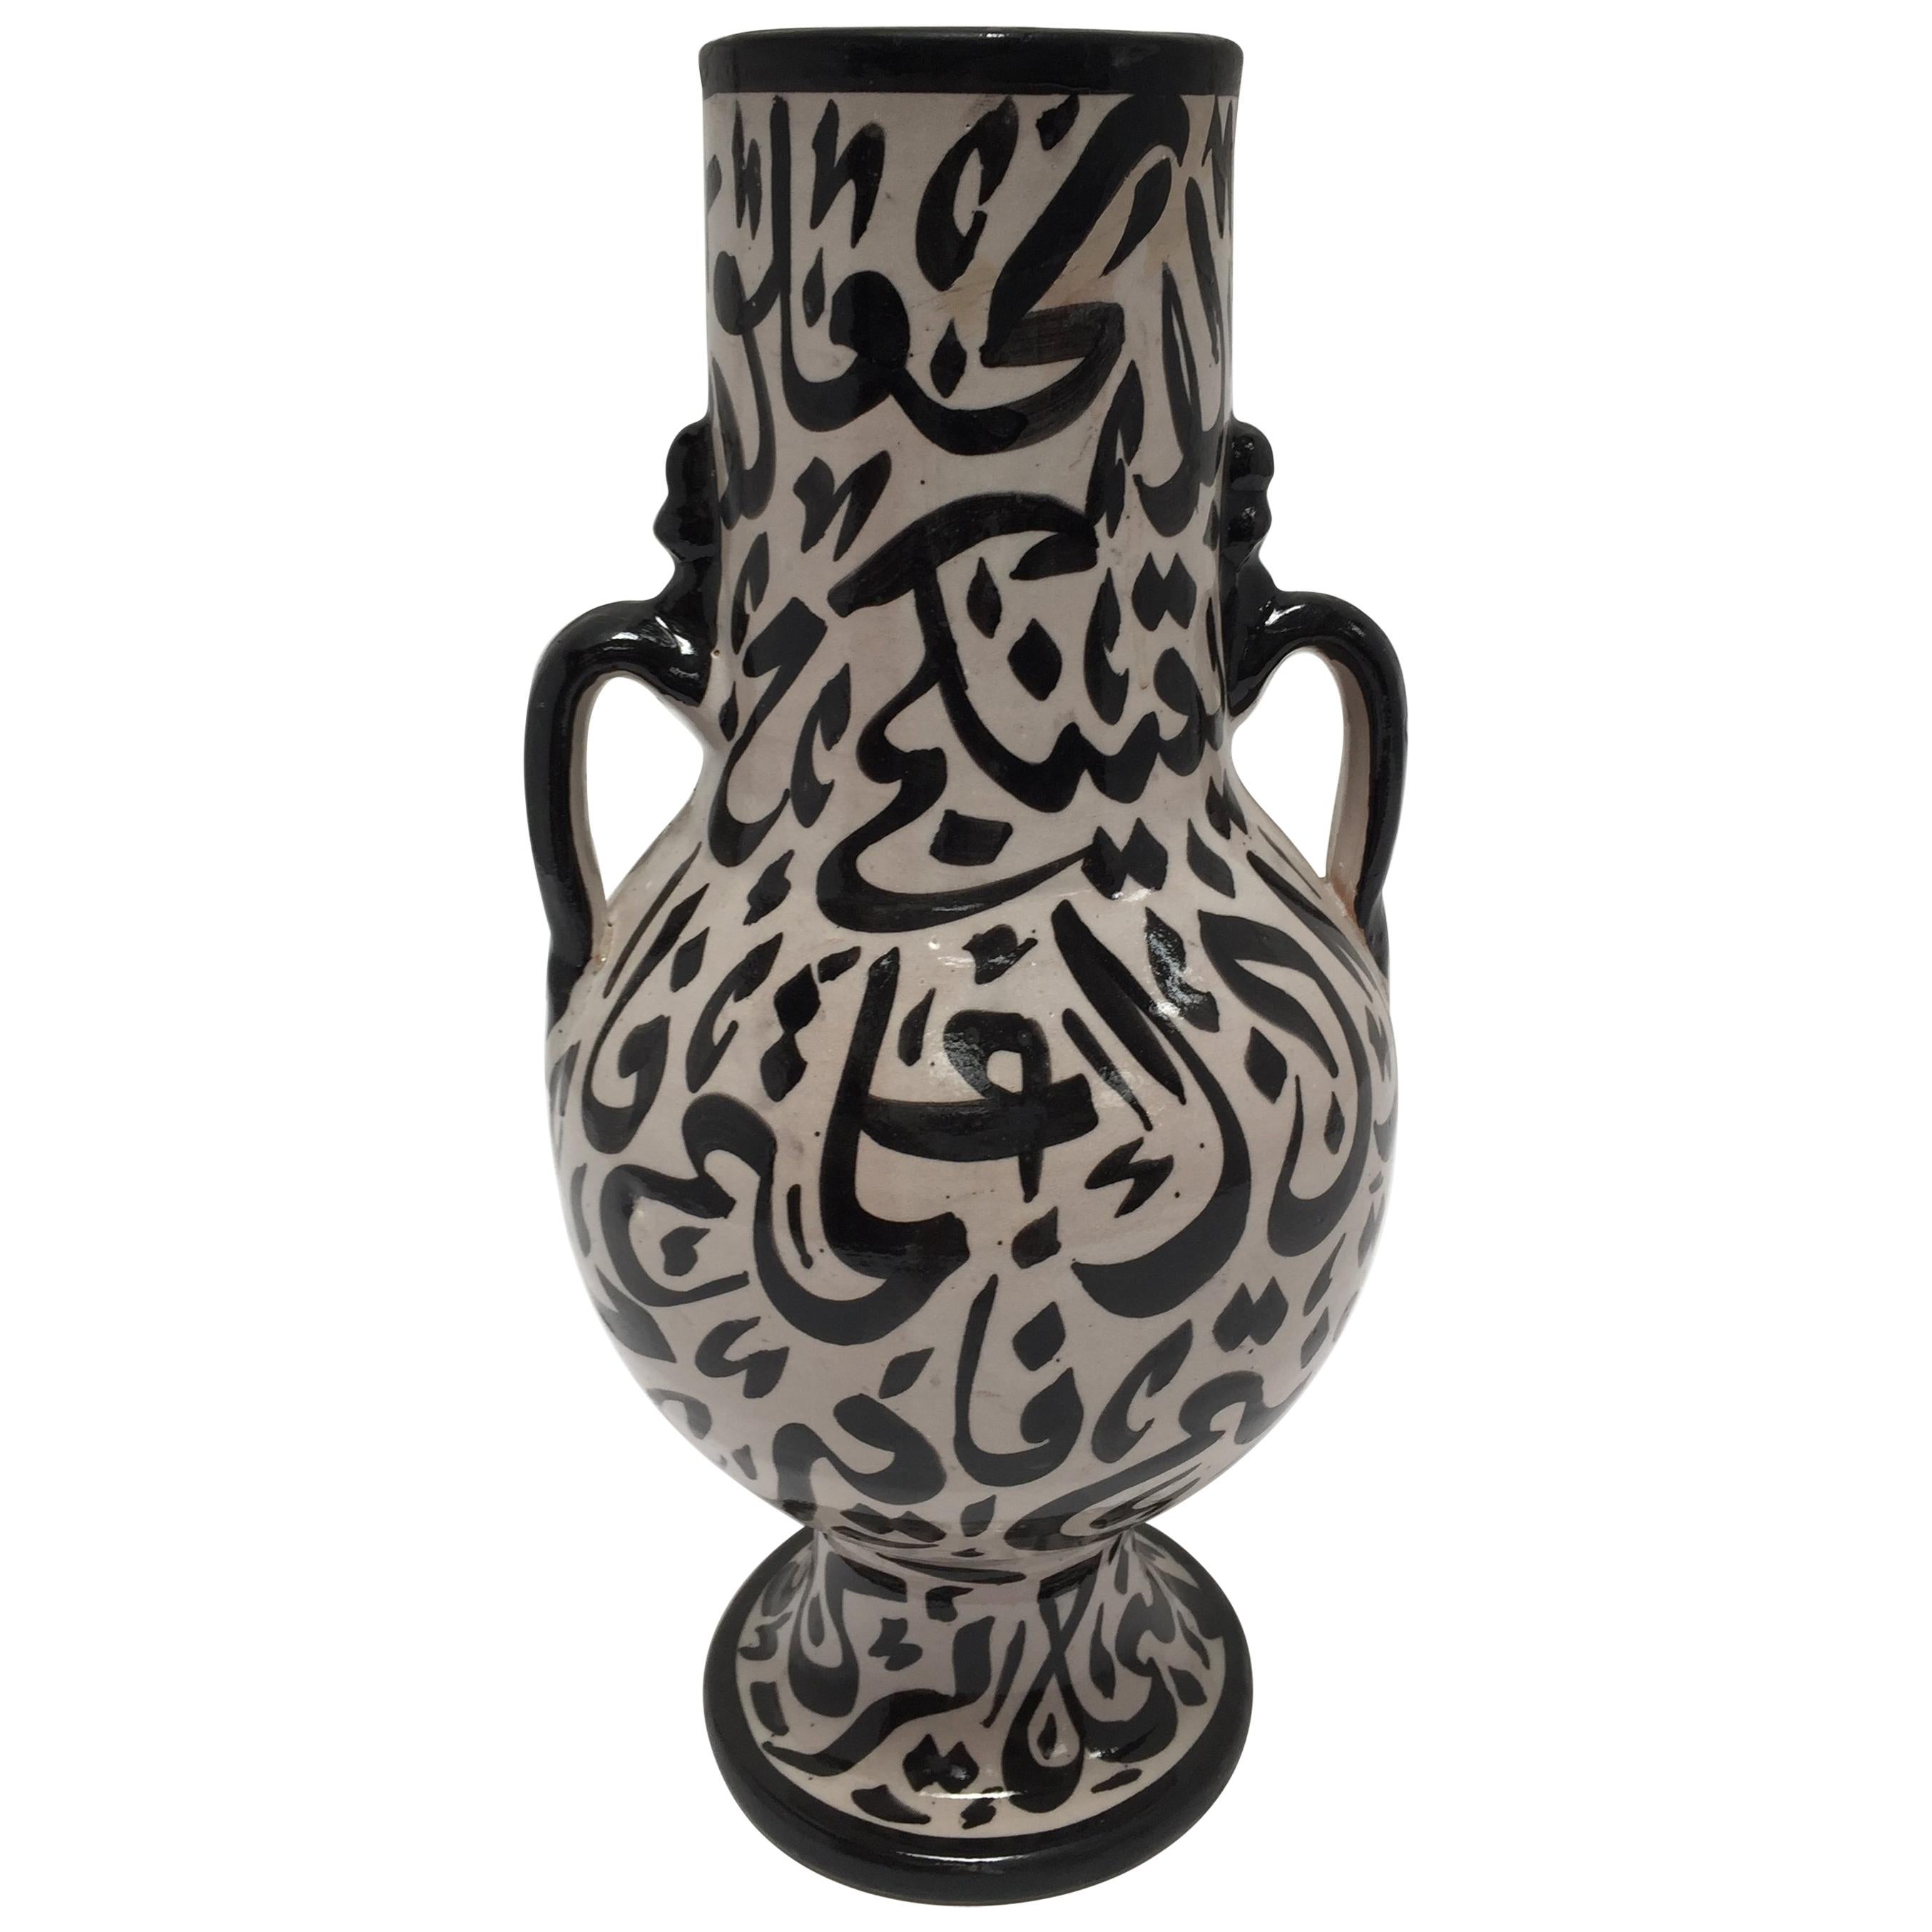 Moroccan Glazed Ceramic Vase with Arabic Calligraphy from Fez